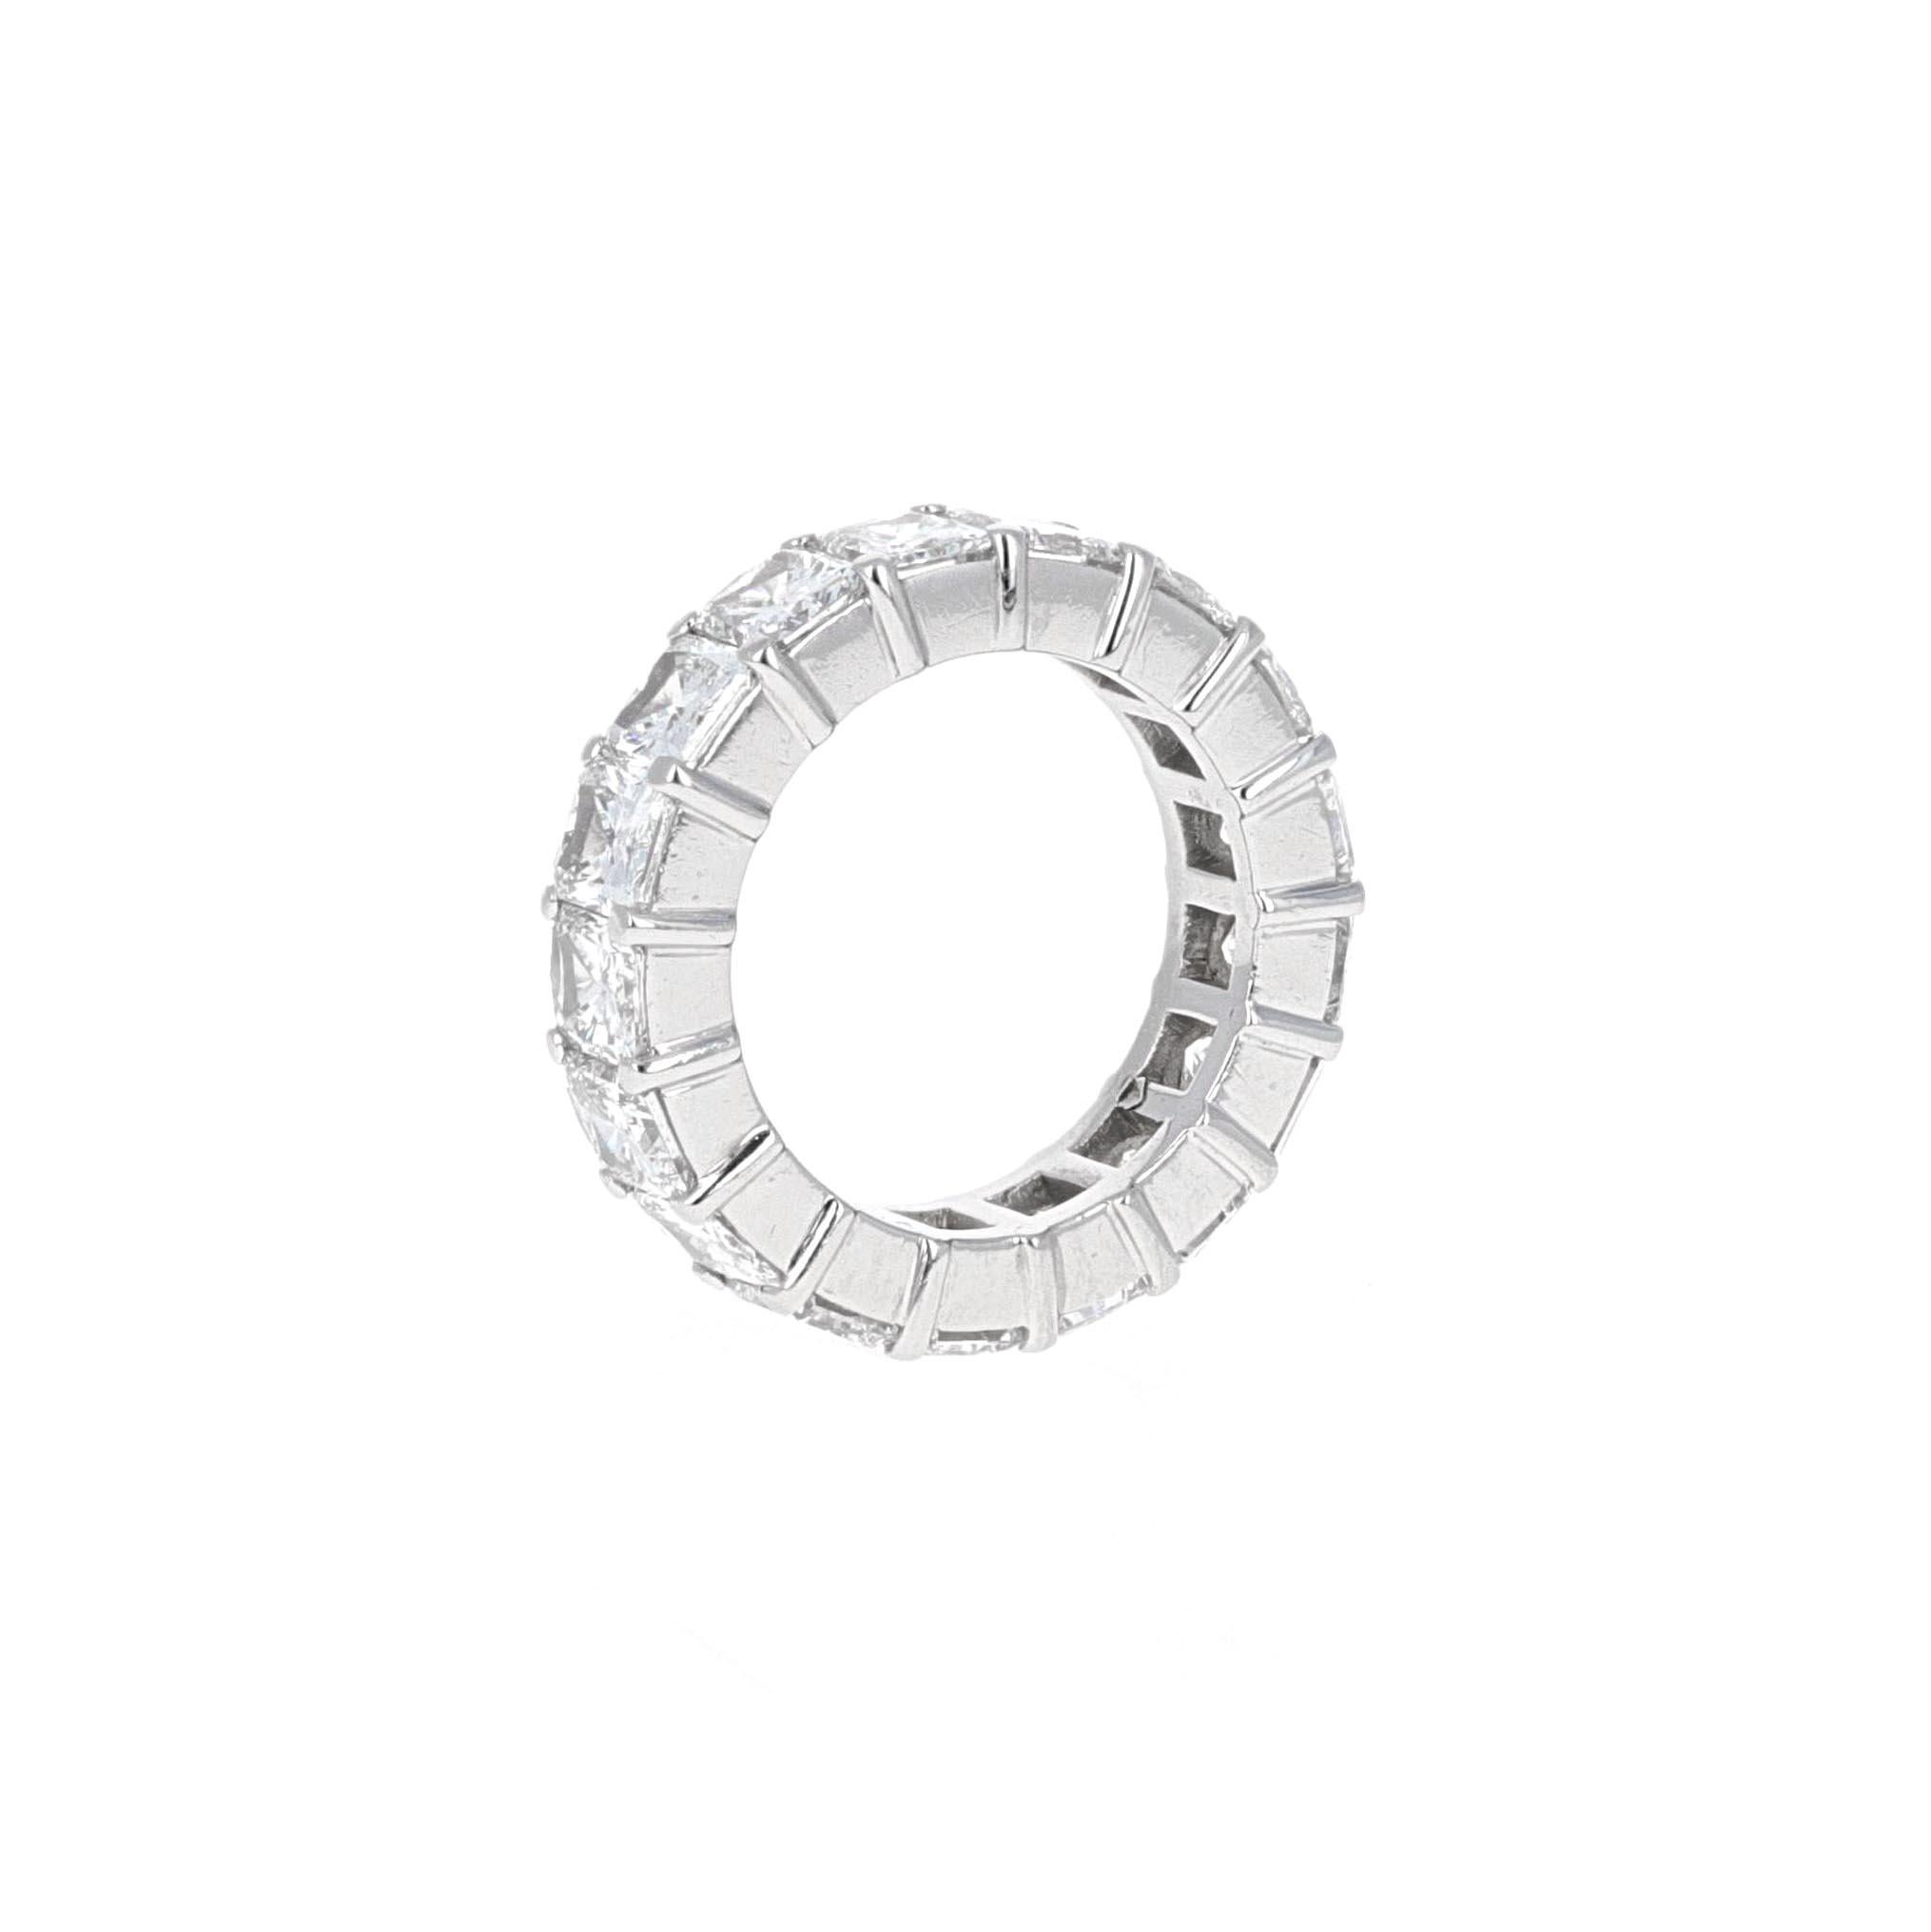 Hand Made platinum elongated radiant cut diamond eternity band. There are a total of 17 stones weighing a total of 9.57 carats. Each diamond weighs over 0.50 carats and is estimated to be F/G in color and VS clarity. All 17 stones match perfectly in